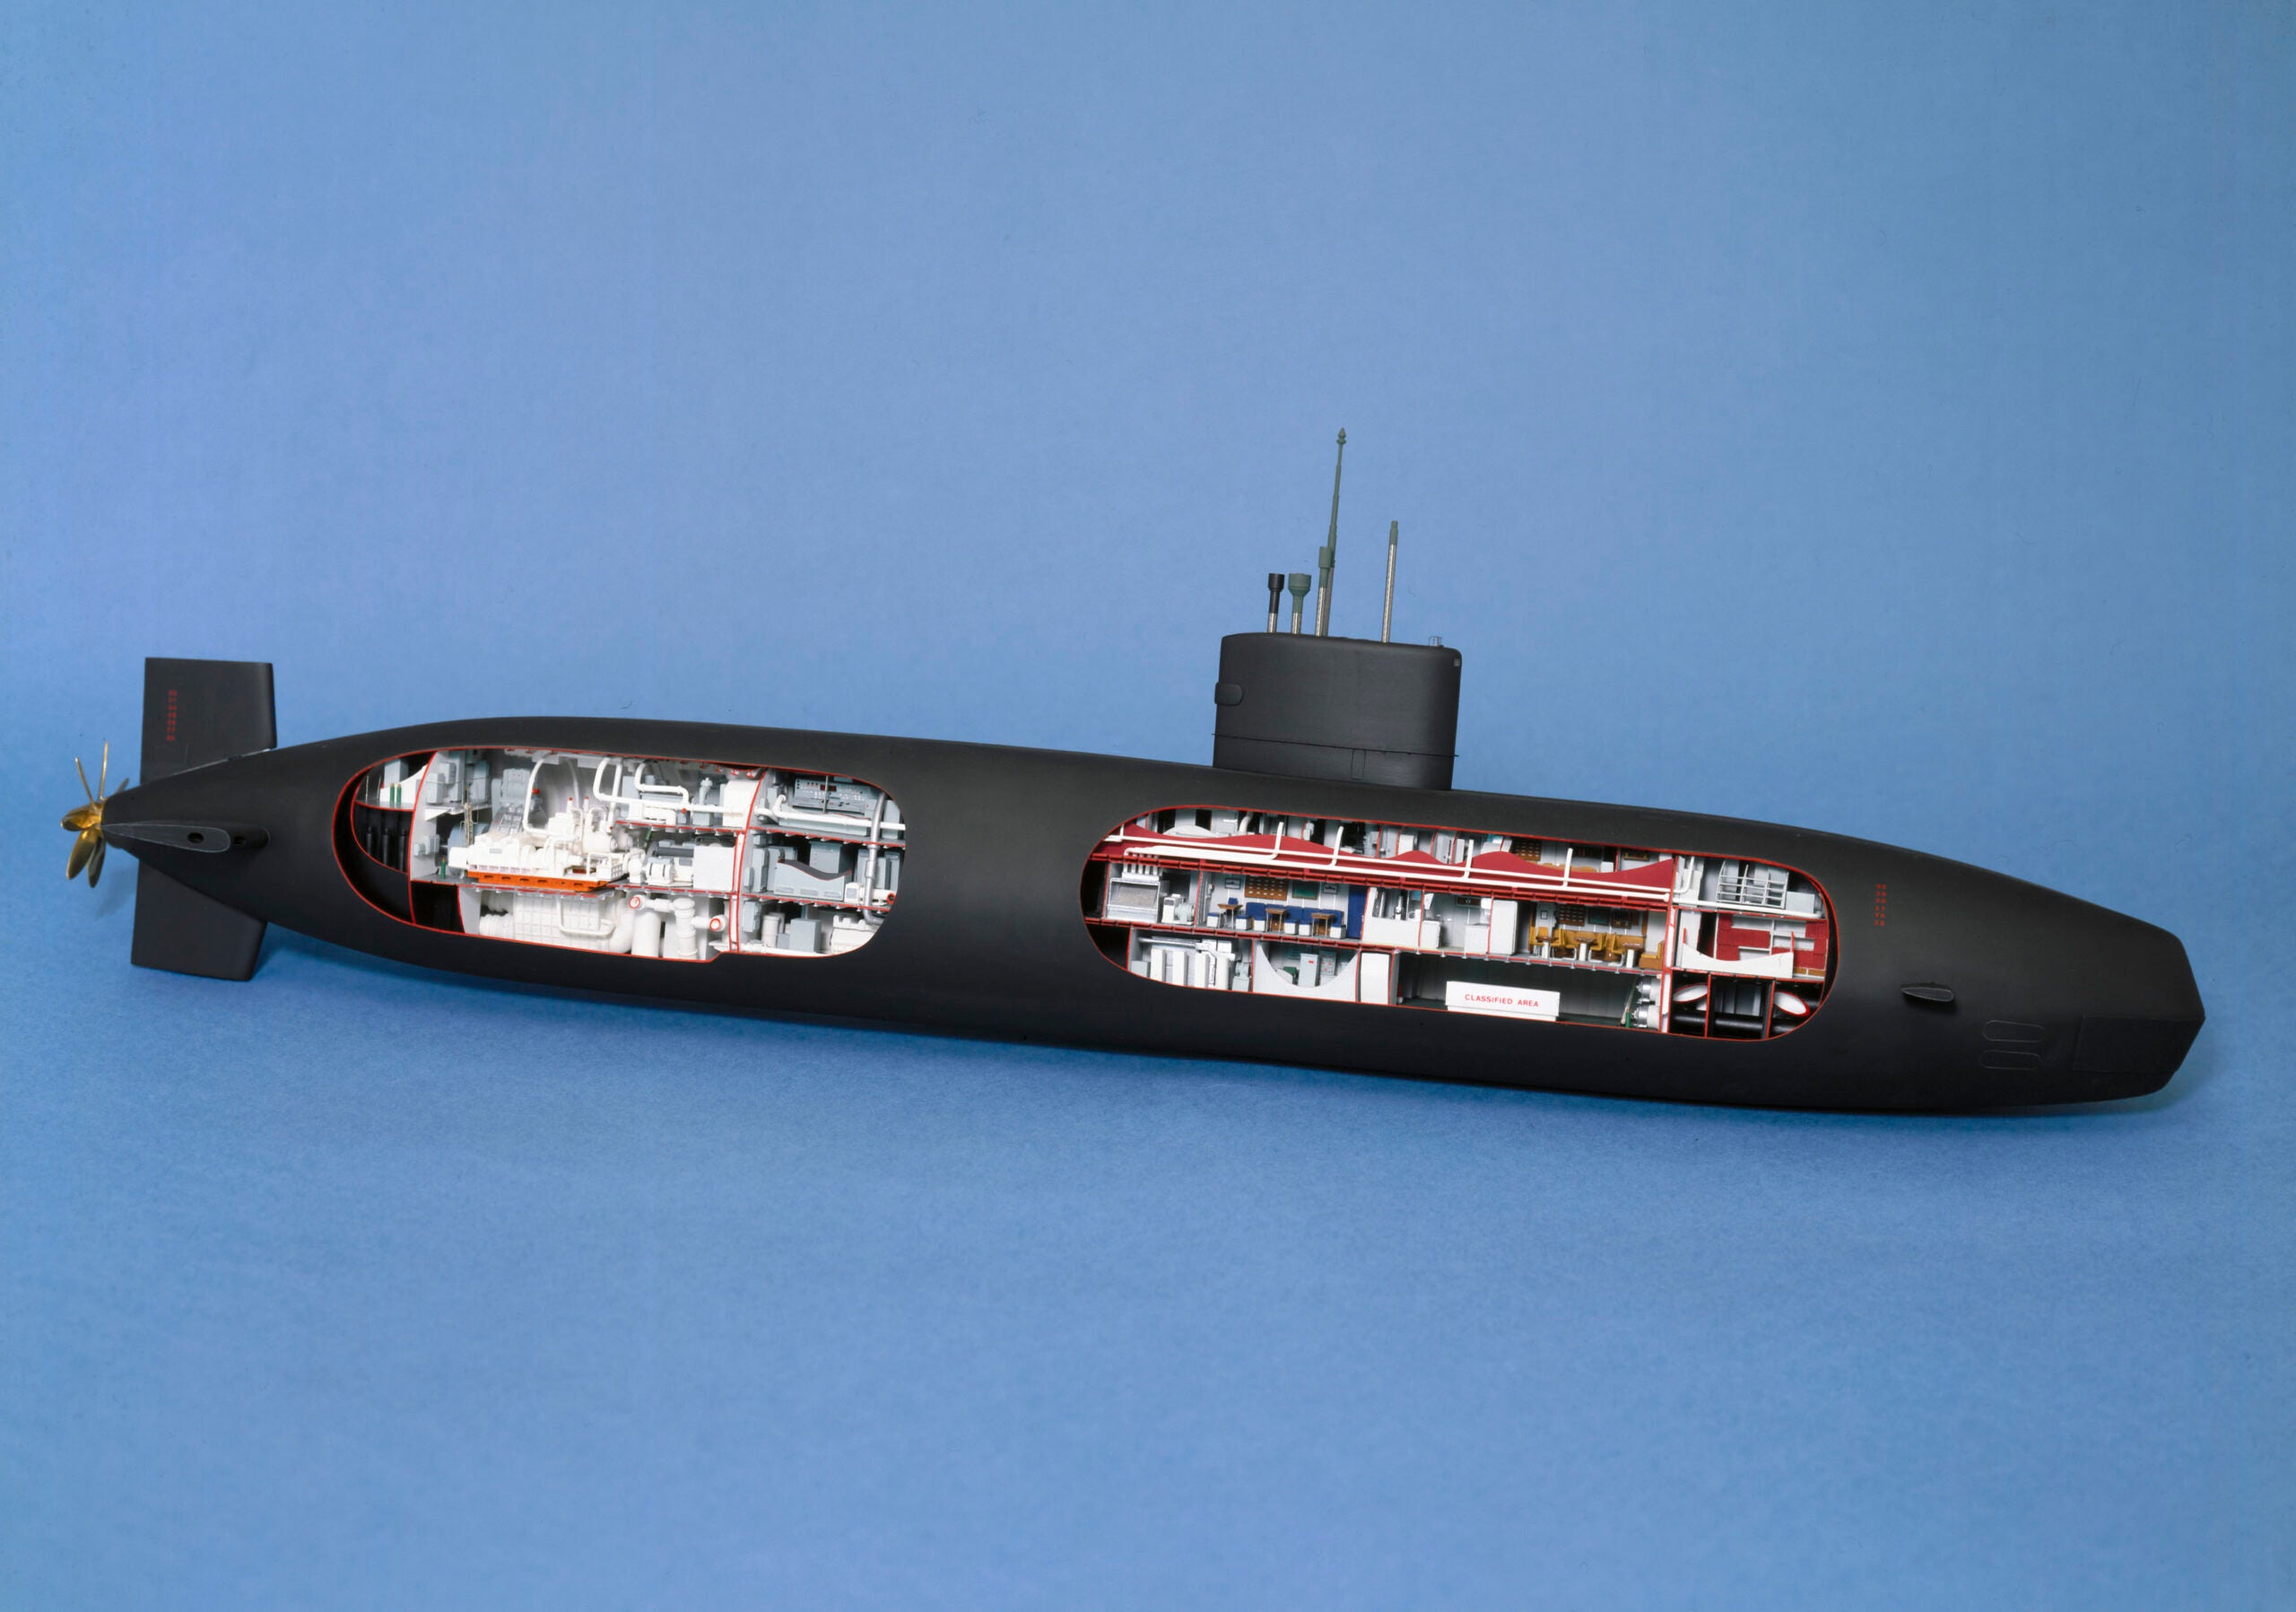 UNITED KINGDOM - JANUARY 09:  Cut-away model. In total six nuclear-powered attack submarines of the �Swiftsure� class were built by Vickers. They were 272 ft long, had a submerged displacement of 4900 tons, and a crew of 116. The submarines were armed with 5 torpedo tubes as well as anti-ship and land-attack missiles, and were capable of a submerged speed of 30 knots. Two vessels, HMS �Splendid� and HMS �Spartan�, saw service in the Falklands War in 1982. HMS �Swiftsure� herself was decommissioned in 1992 after problems with her reactor became evident during a refit.  (Photo by SSPL/Getty Images)